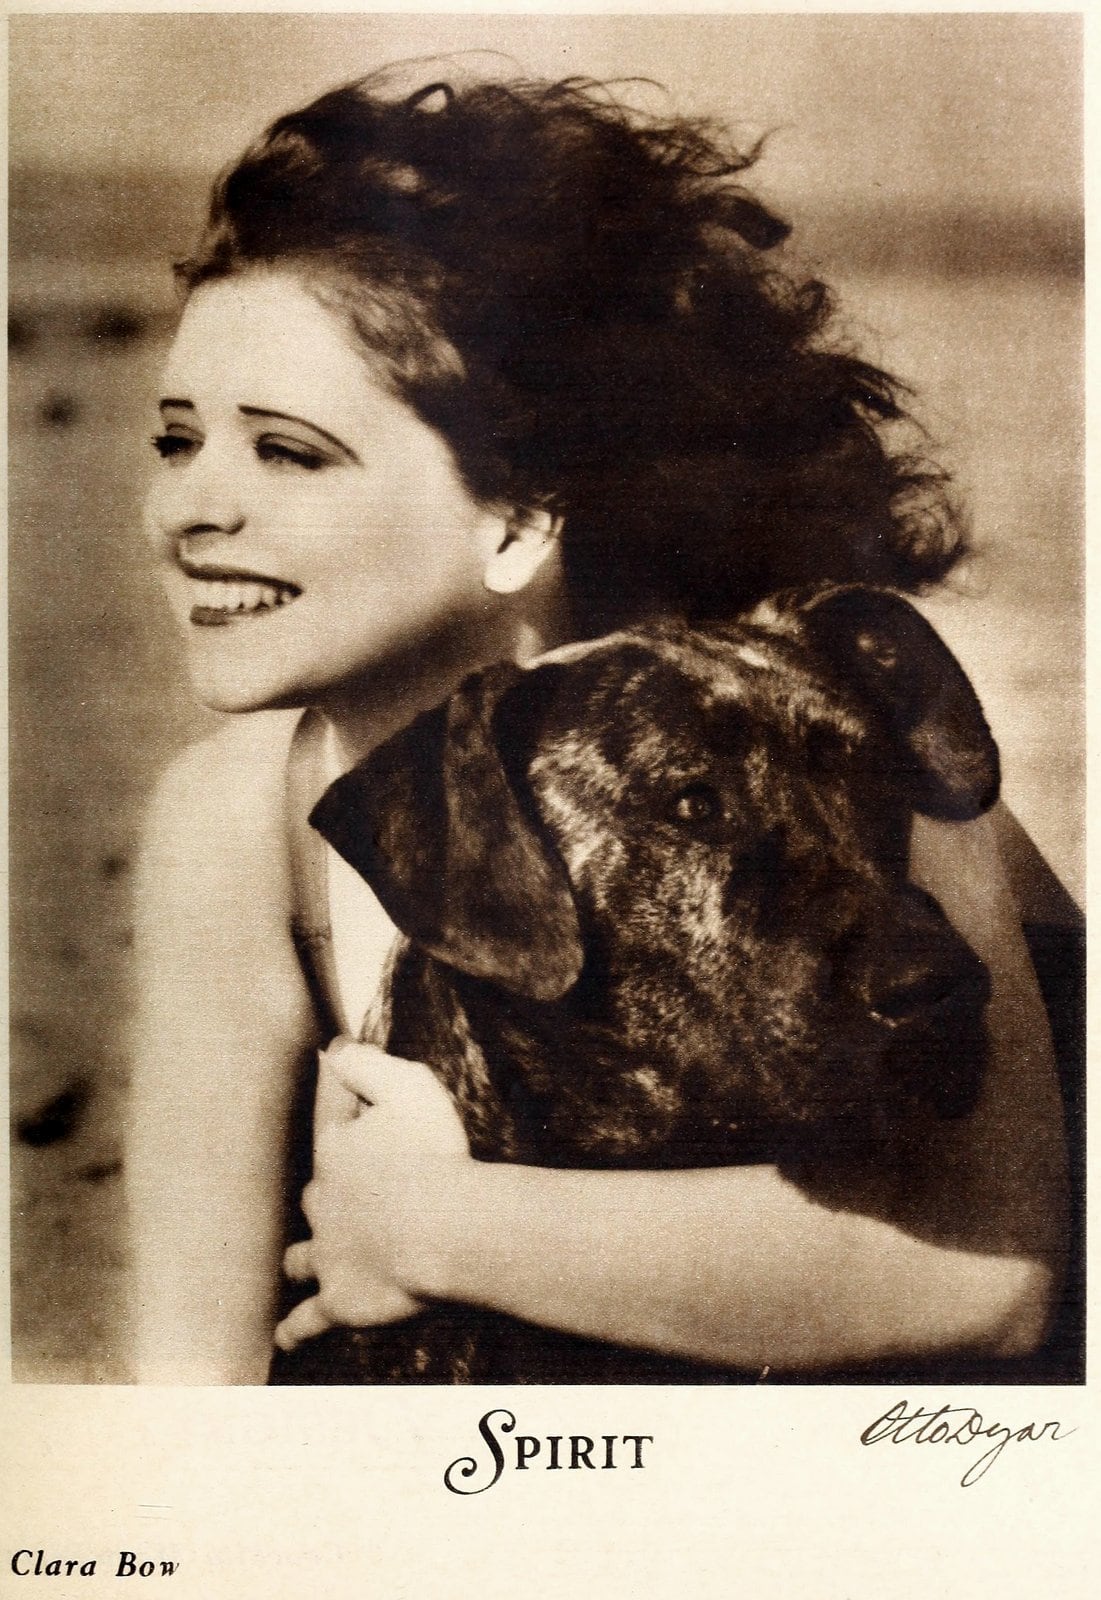 Silent movie actress Clara Bow with a dog - Star from the 1920s and 1930s